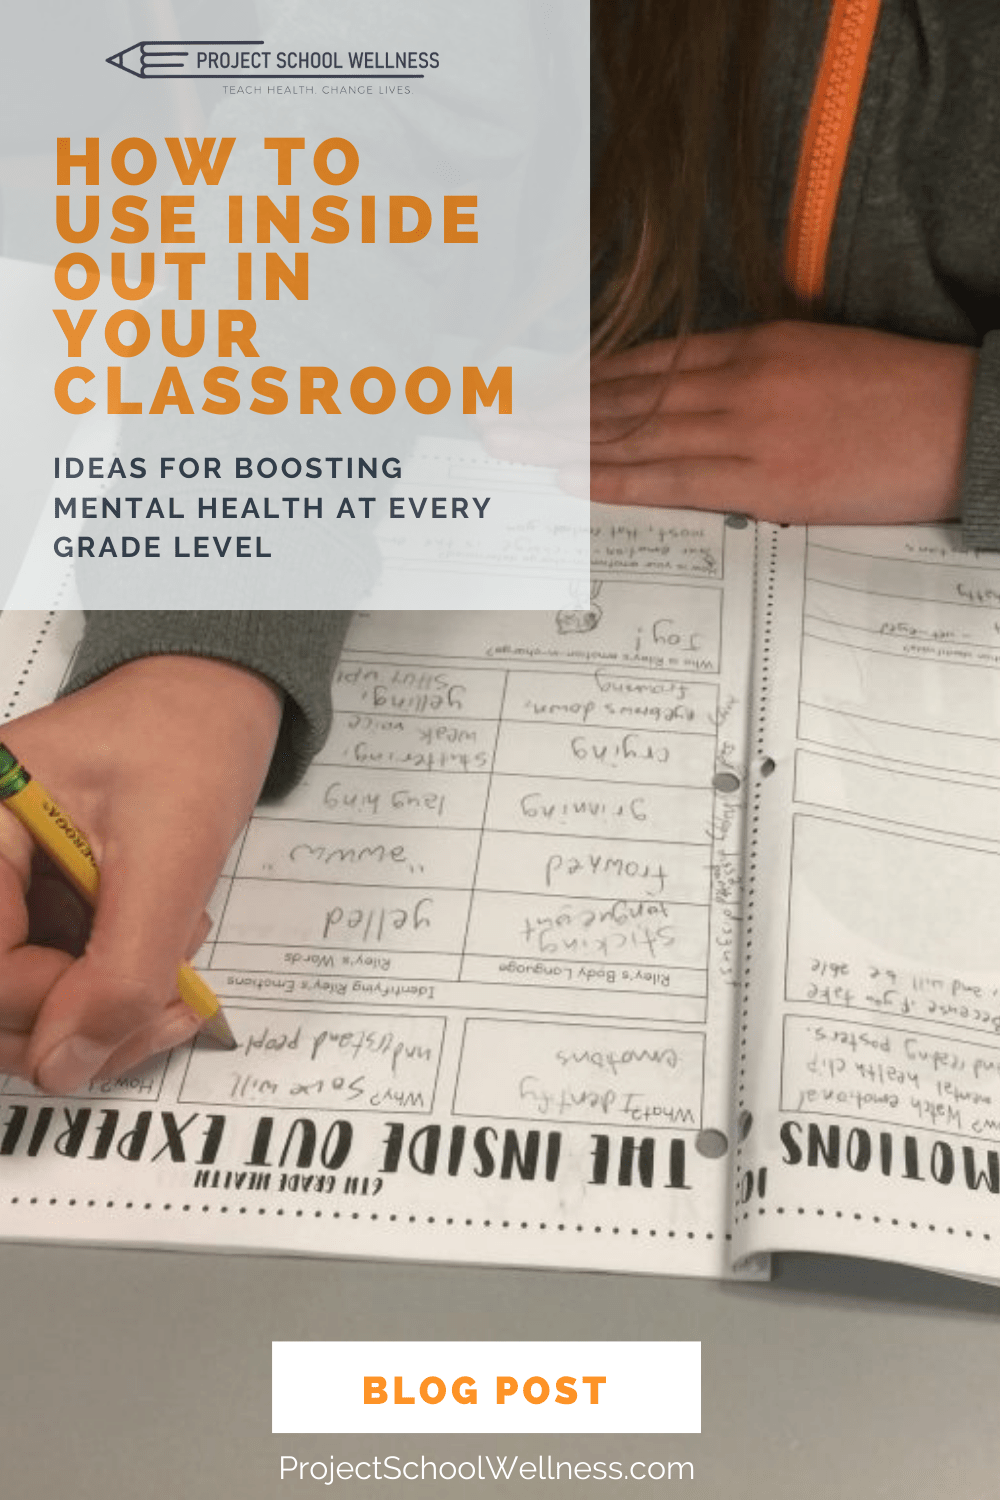 Ideas for Boosting Mental Health at Every Grade Level and how to use Inside Out in your classroom to teach Health Education